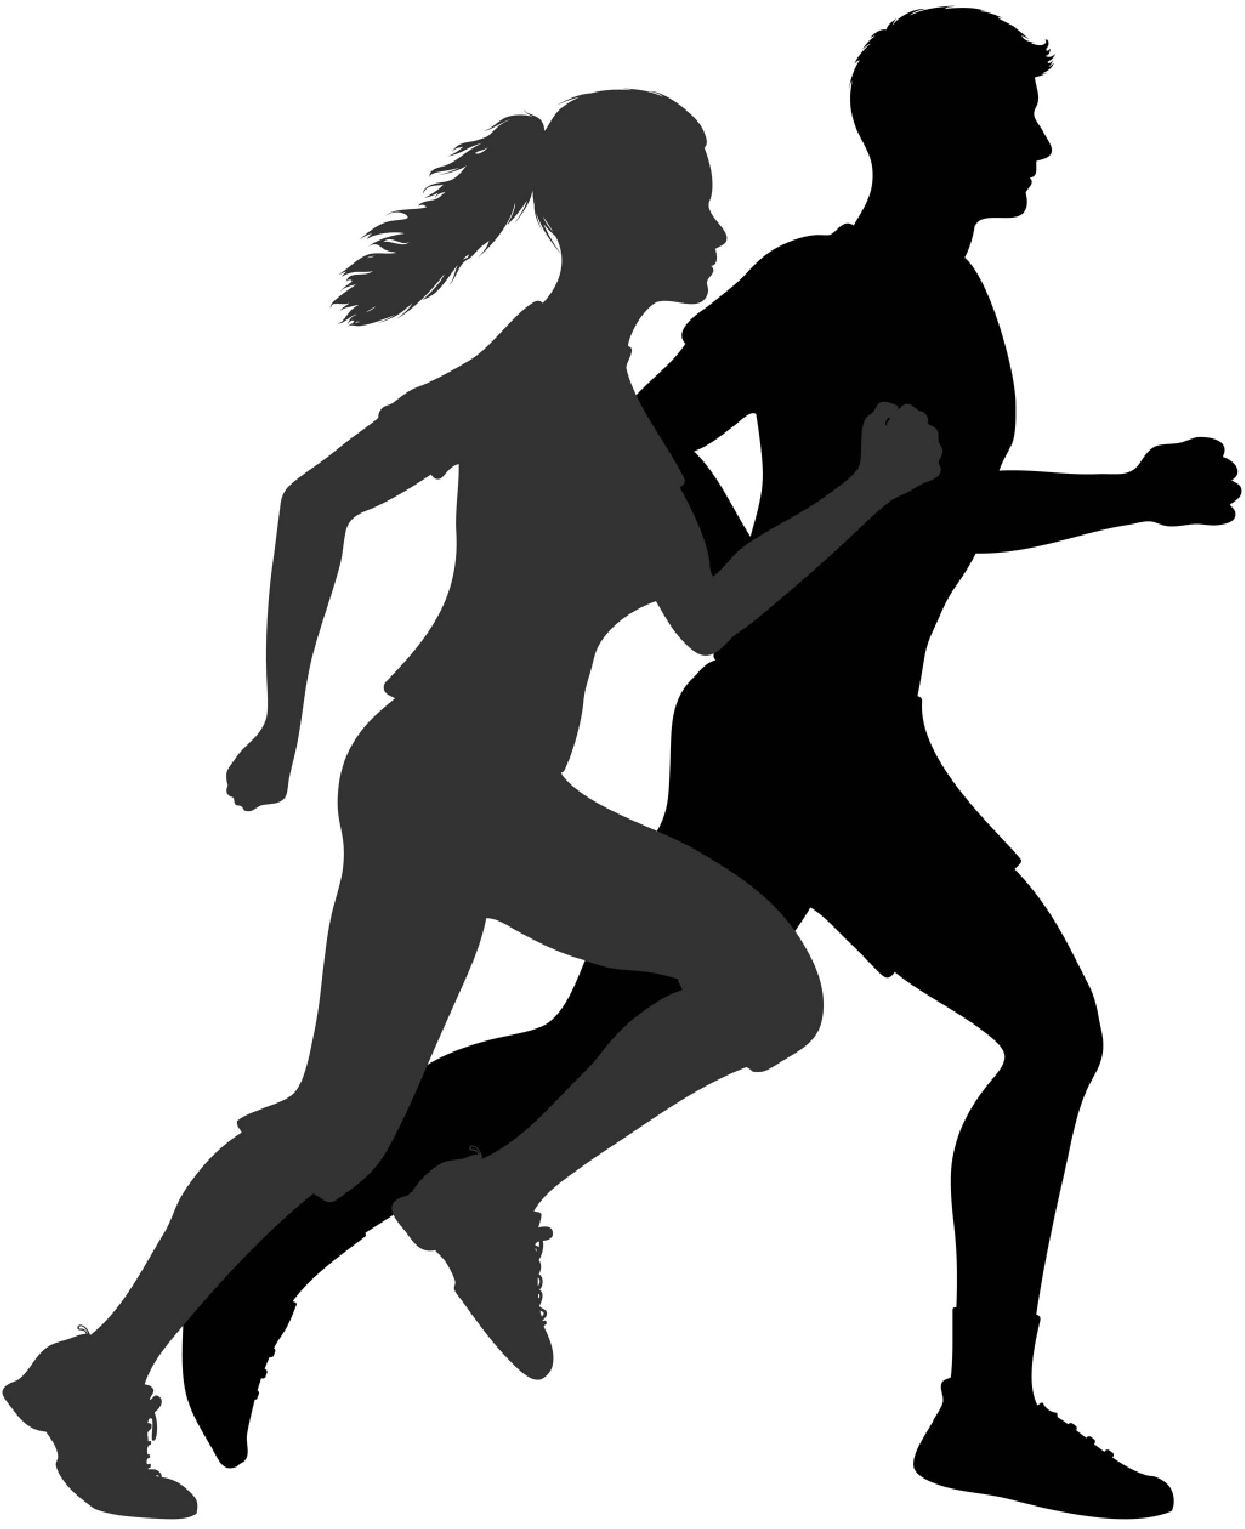 Runner clipart personal fitness. What about cardio run